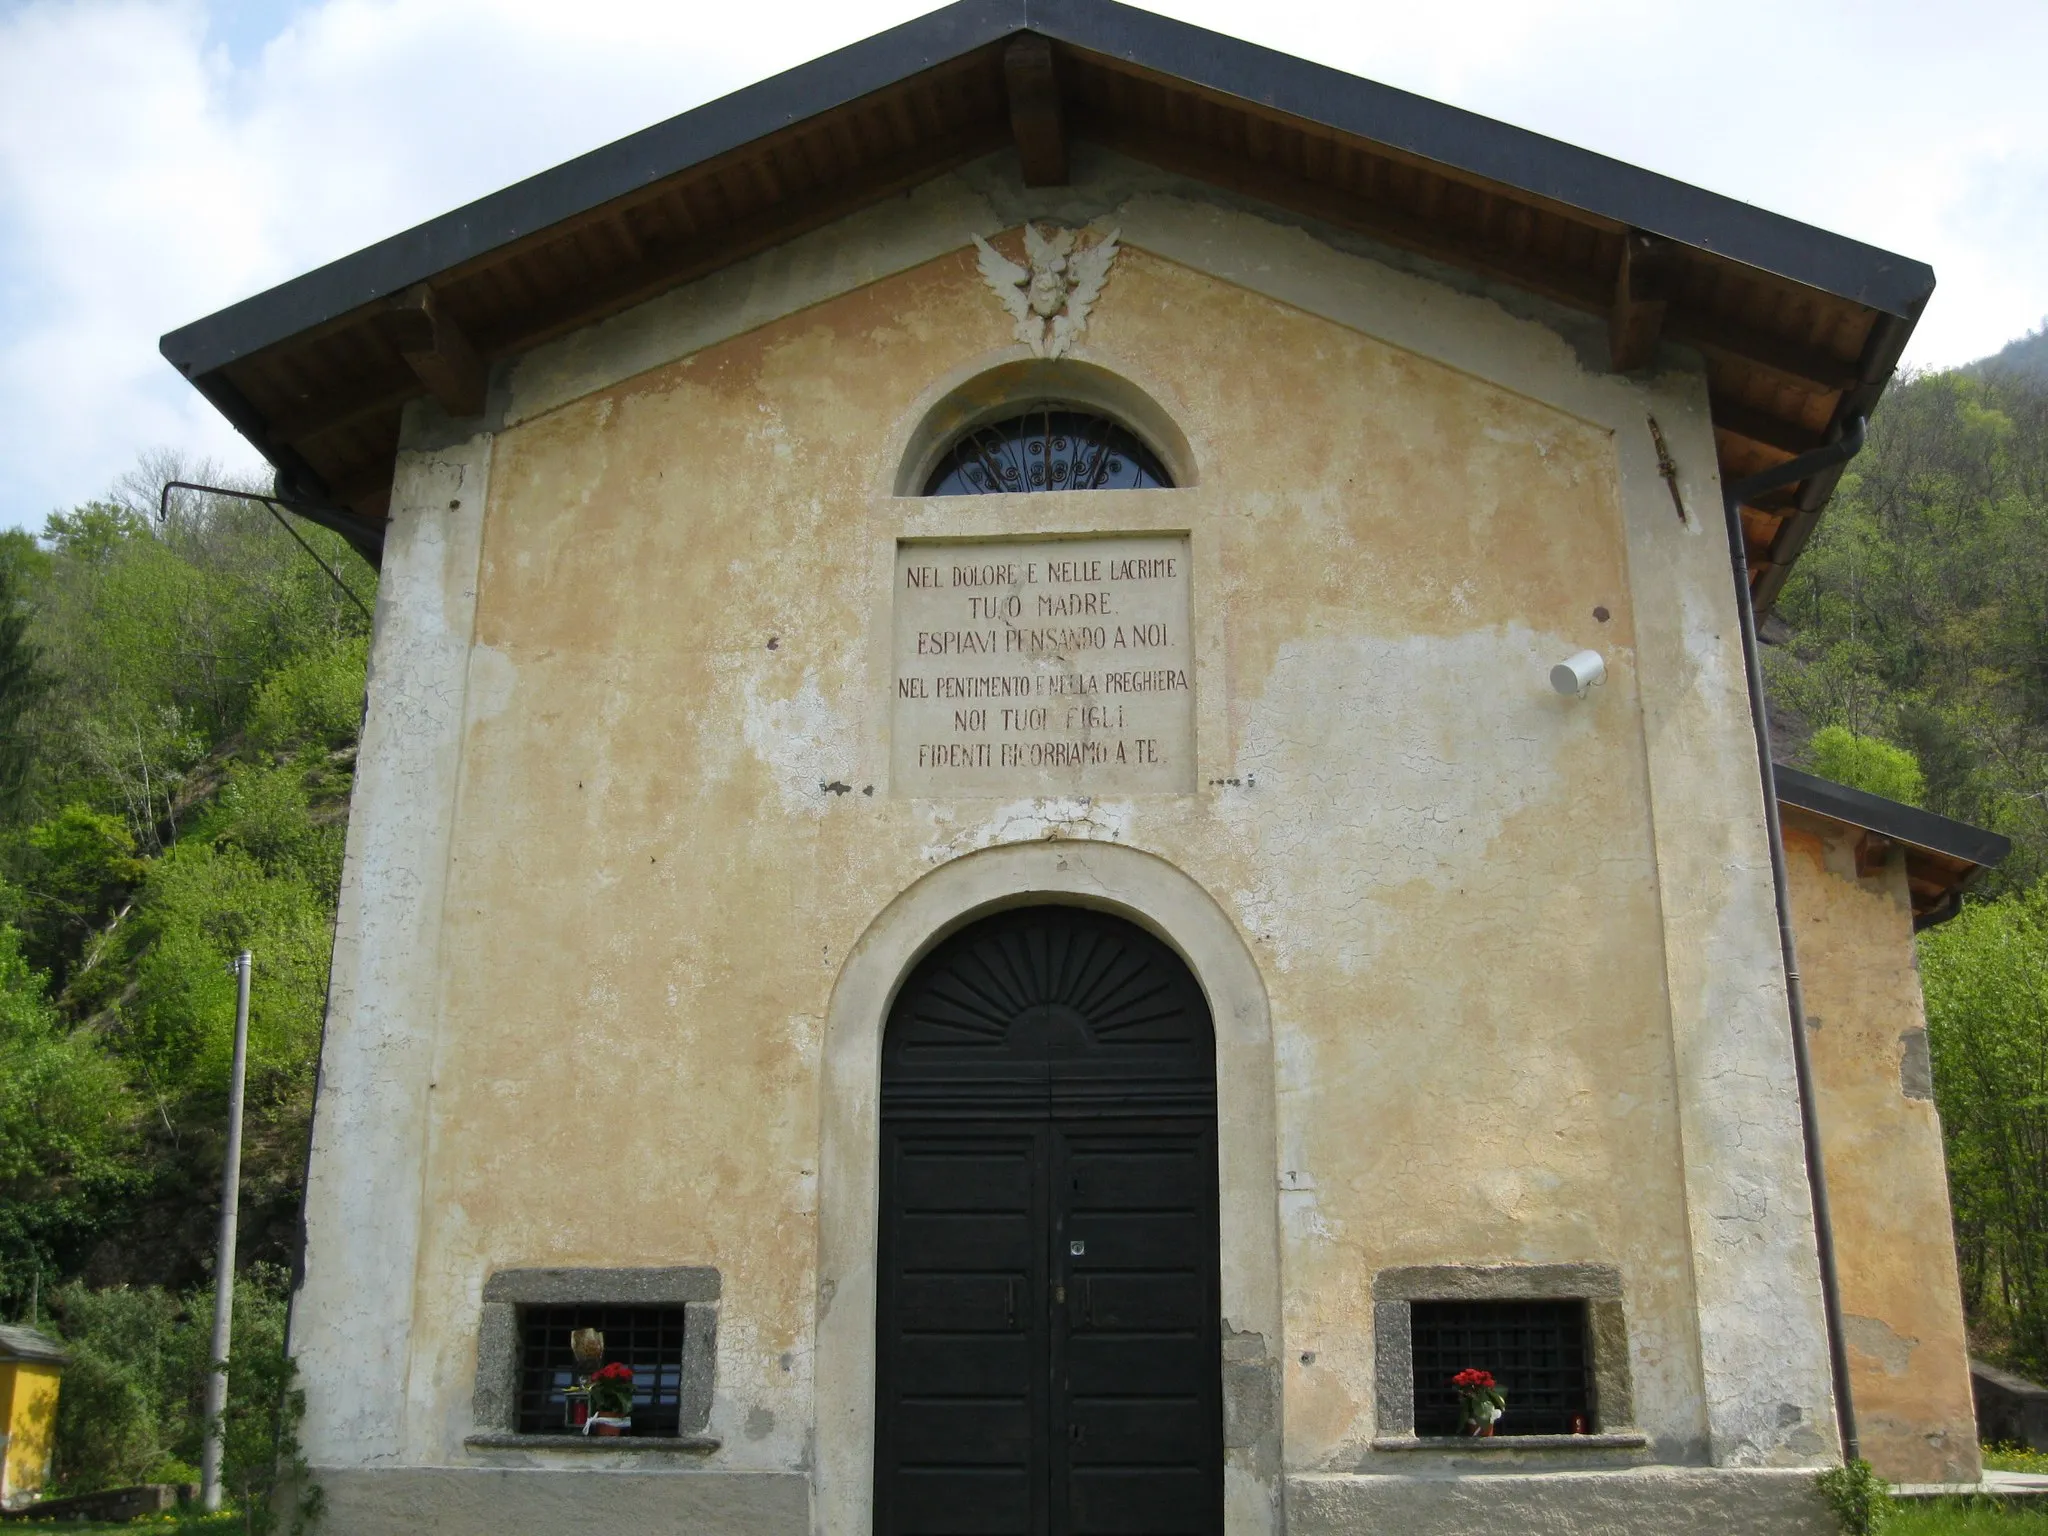 Photo showing: S. Catherine's church in Introbio, a small town in Lombardy, Italy